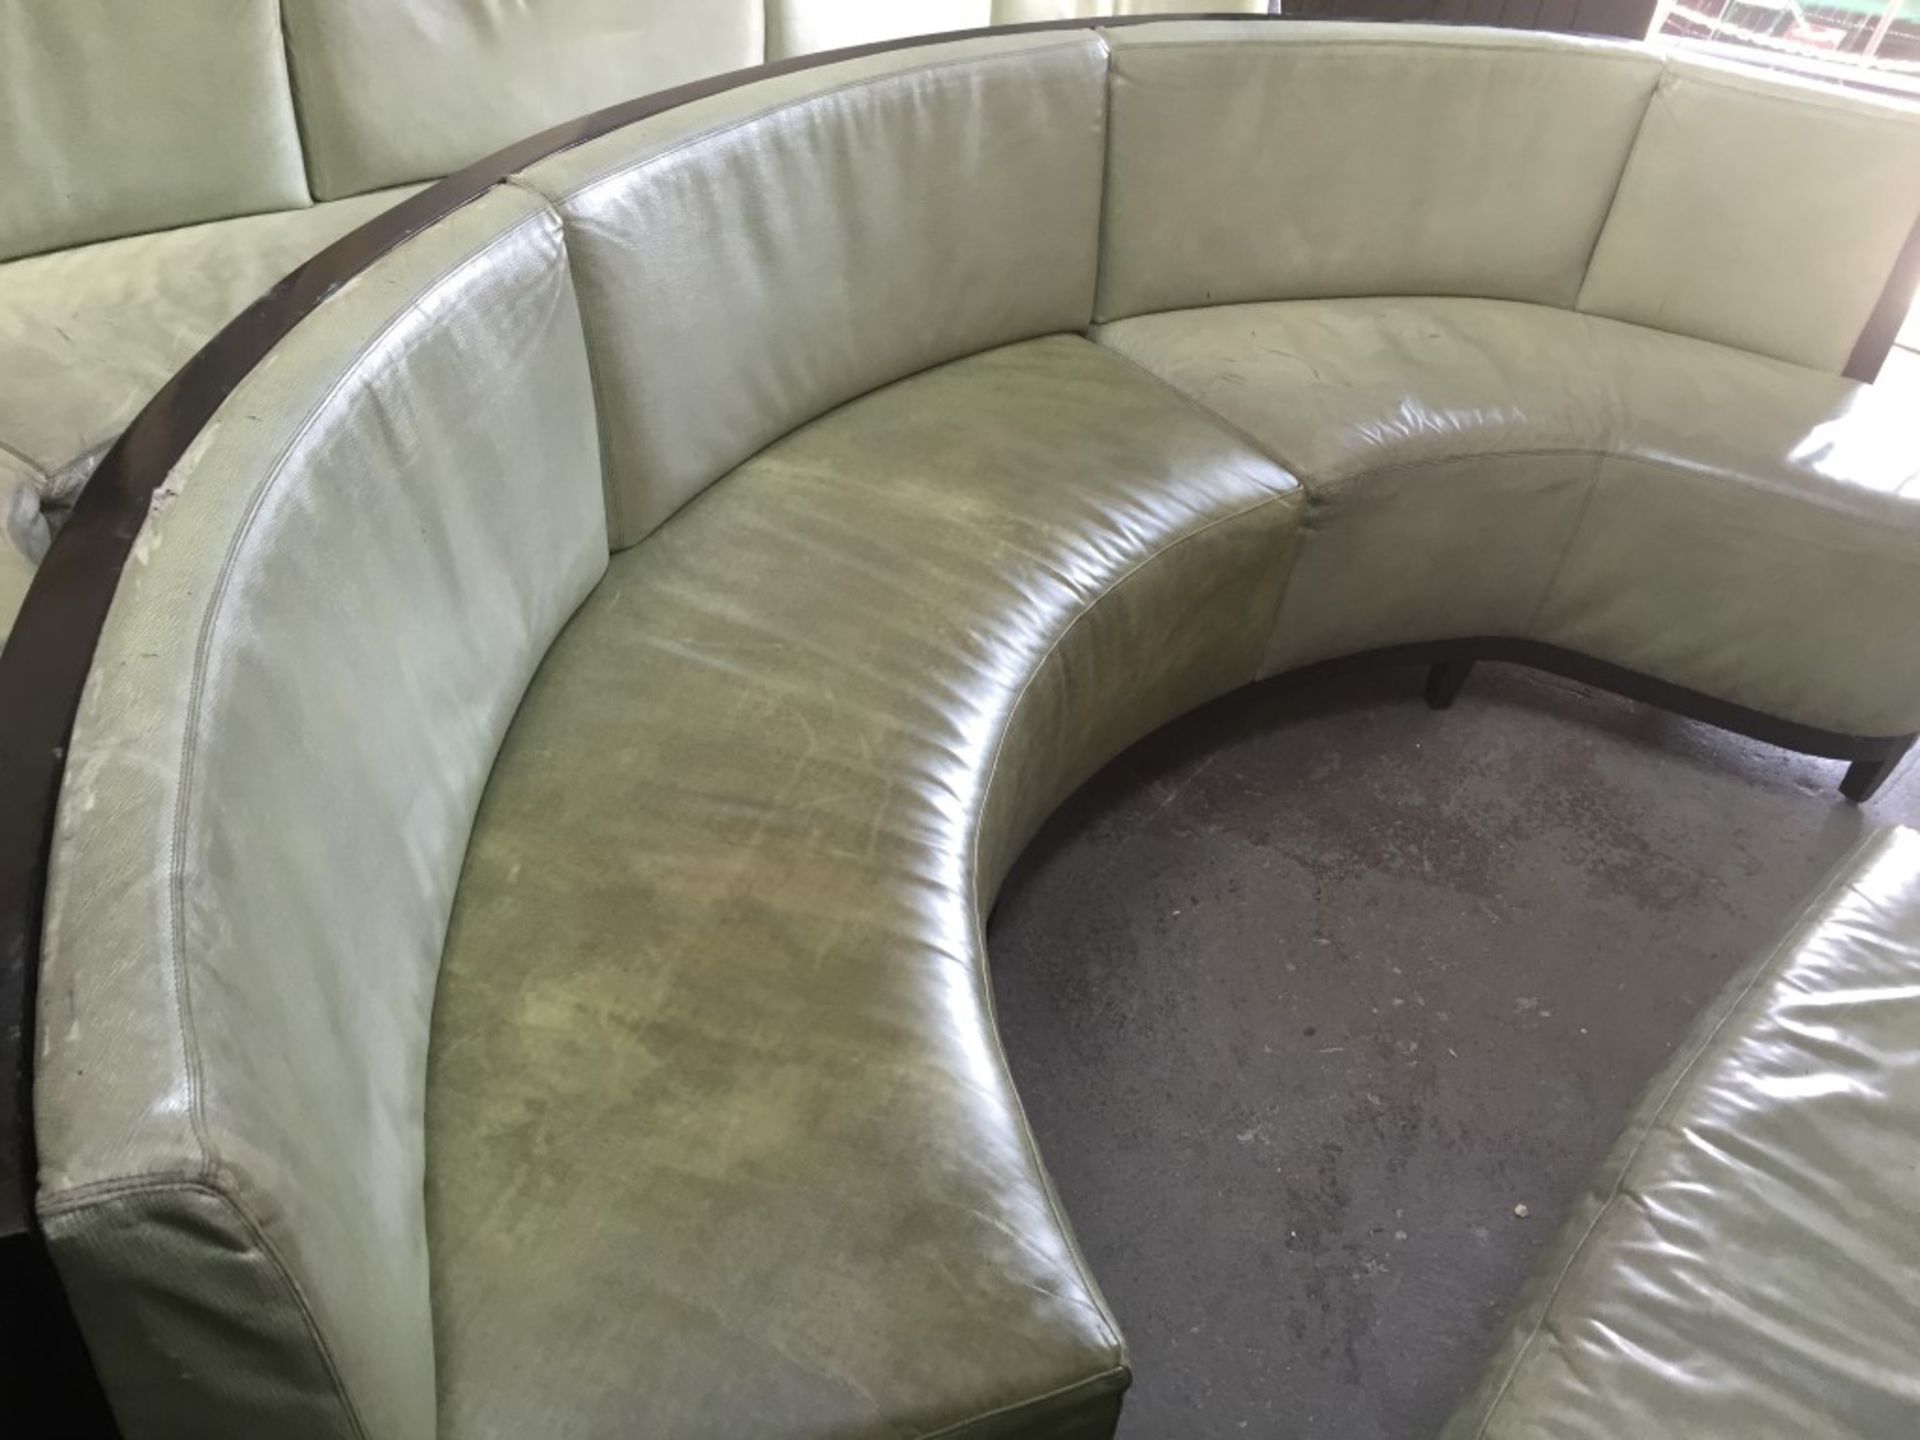 1 x Luxury Upholstered Curved Seating Area - Recently Removed From Nobu - Dimensions: W285 x D62cm x - Image 12 of 23